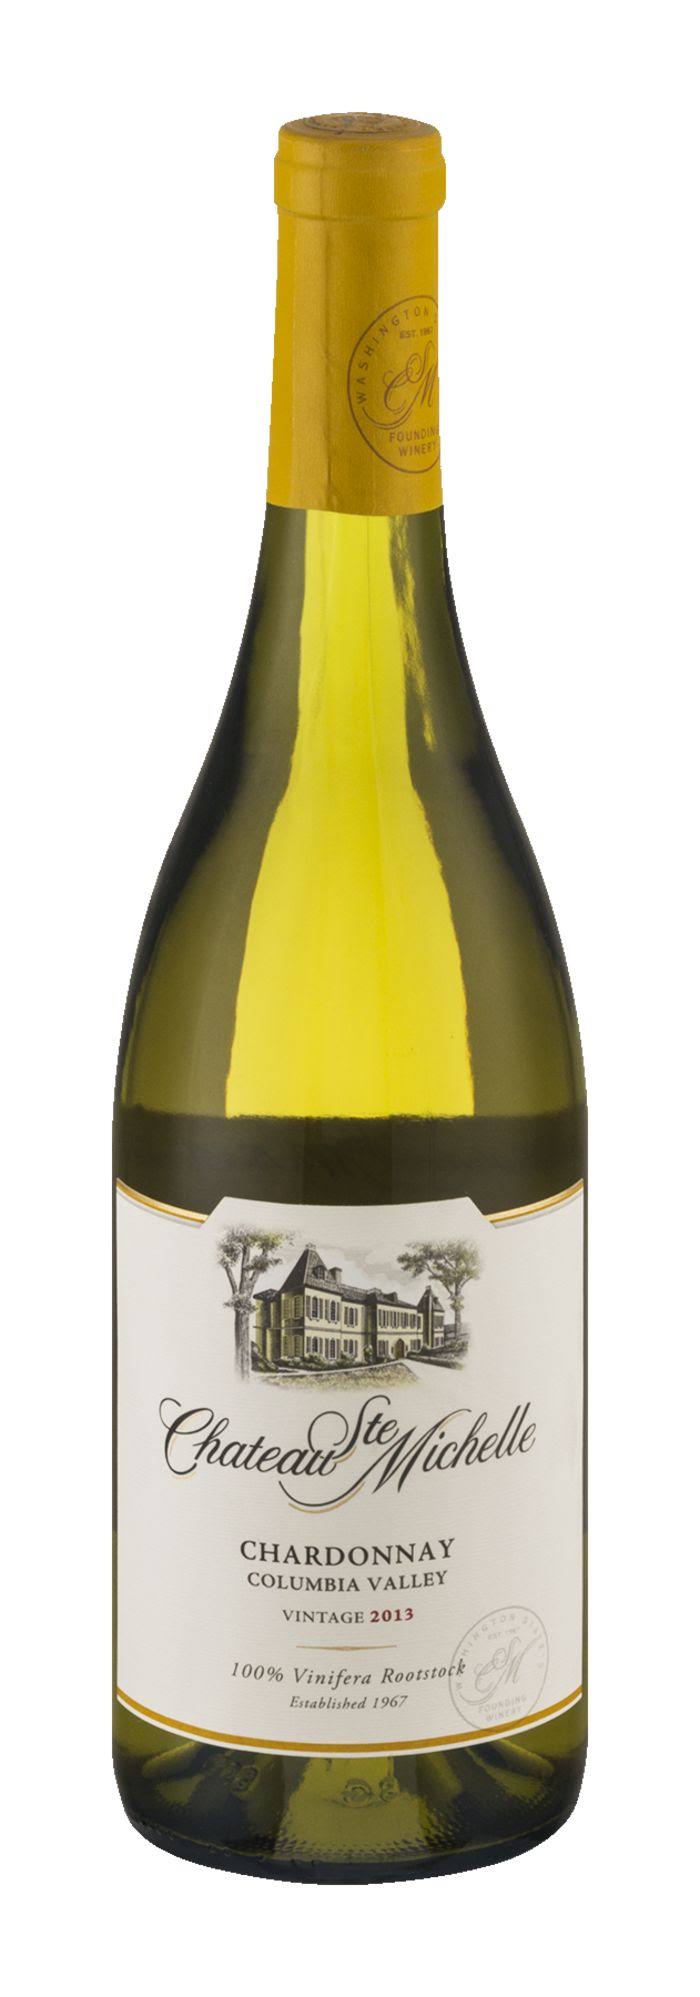 Chateau Ste. Michelle Chardonnay, Columbia Valley - 750 ml